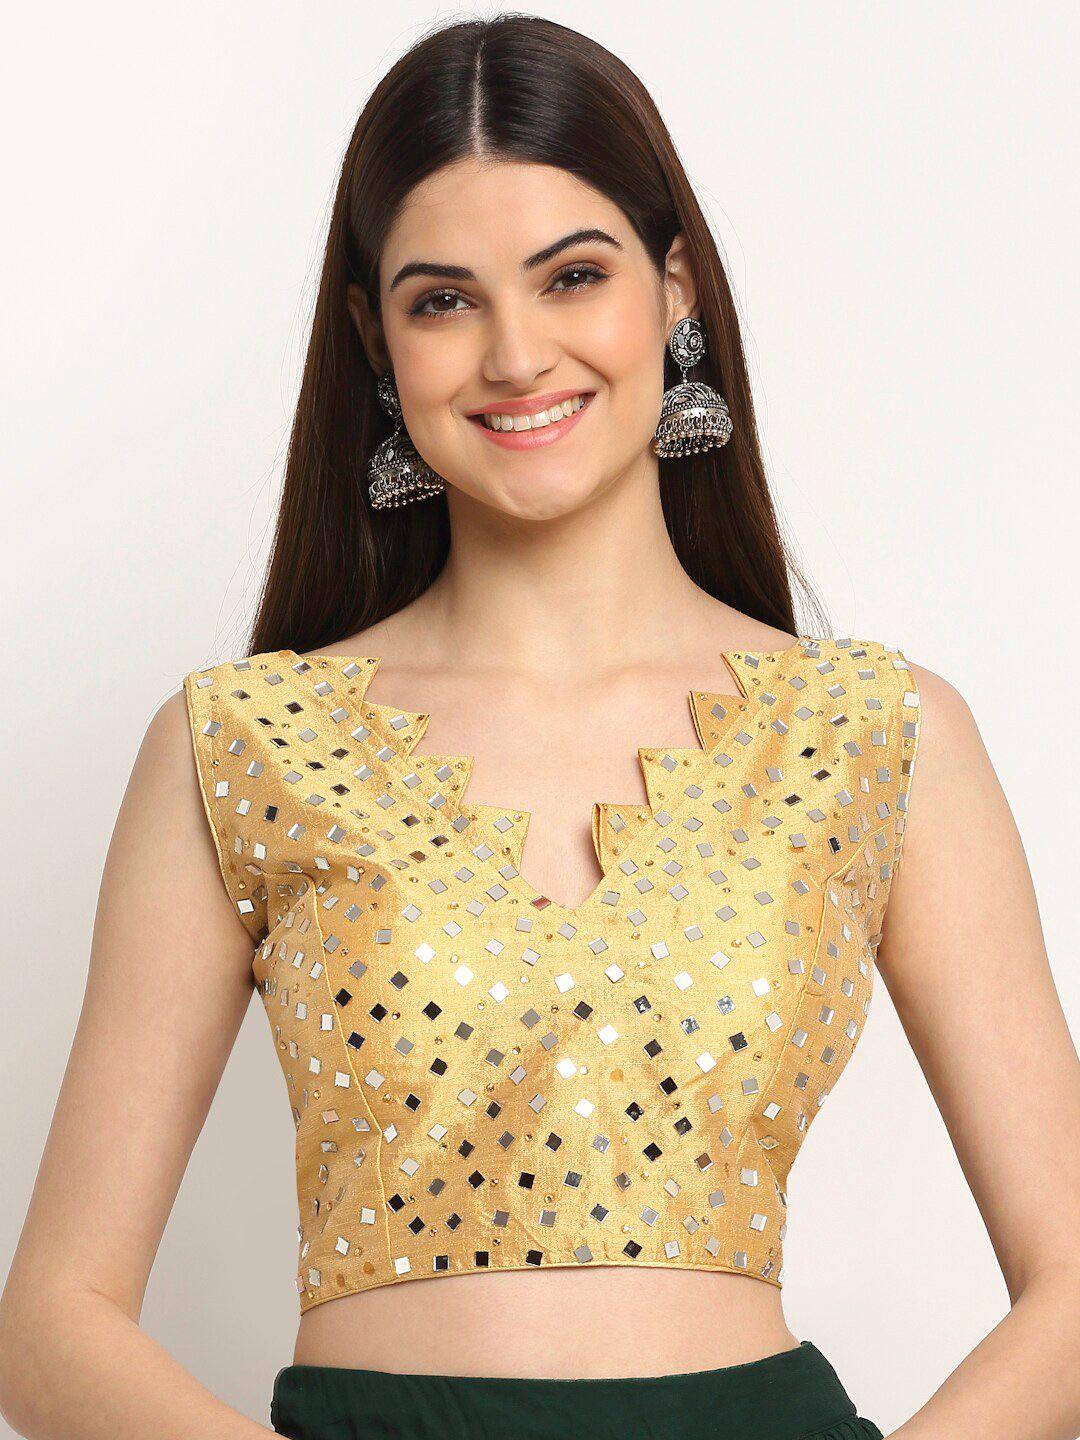 grancy woman gold-coloured embellished mirror work saree blouse